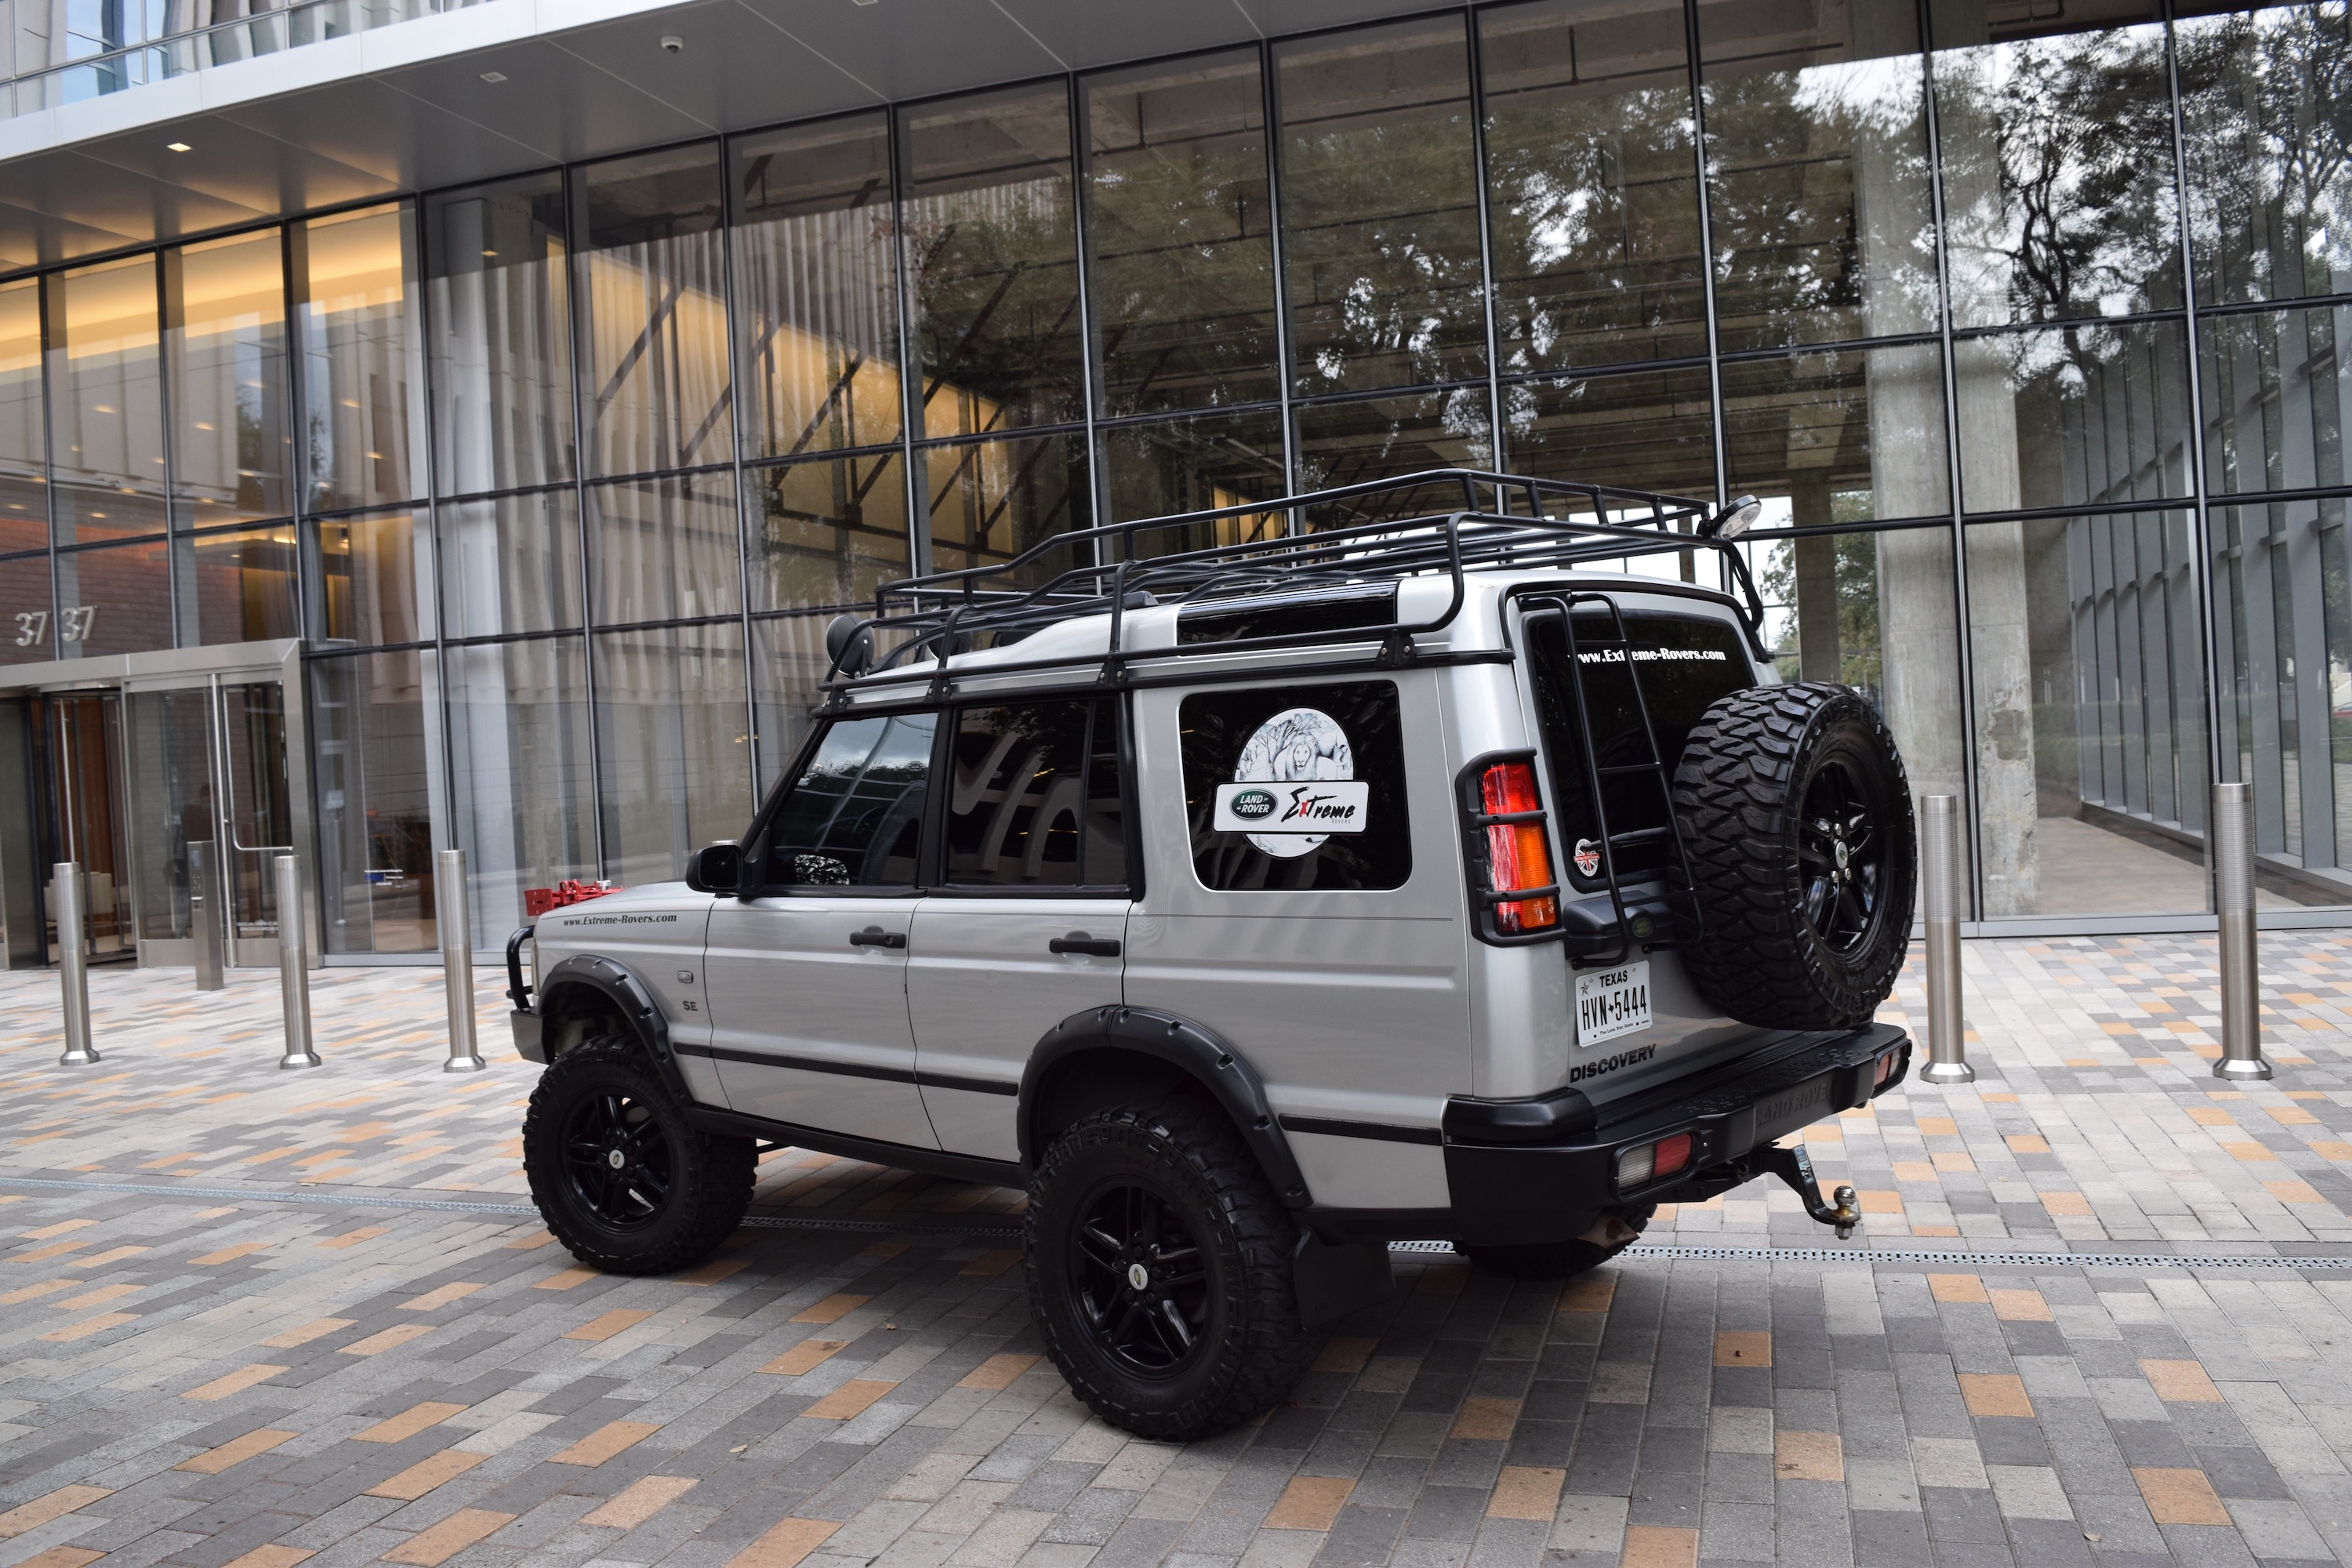 “Silver Bullet” 2003 Land Rover Discovery II SE 120k miles